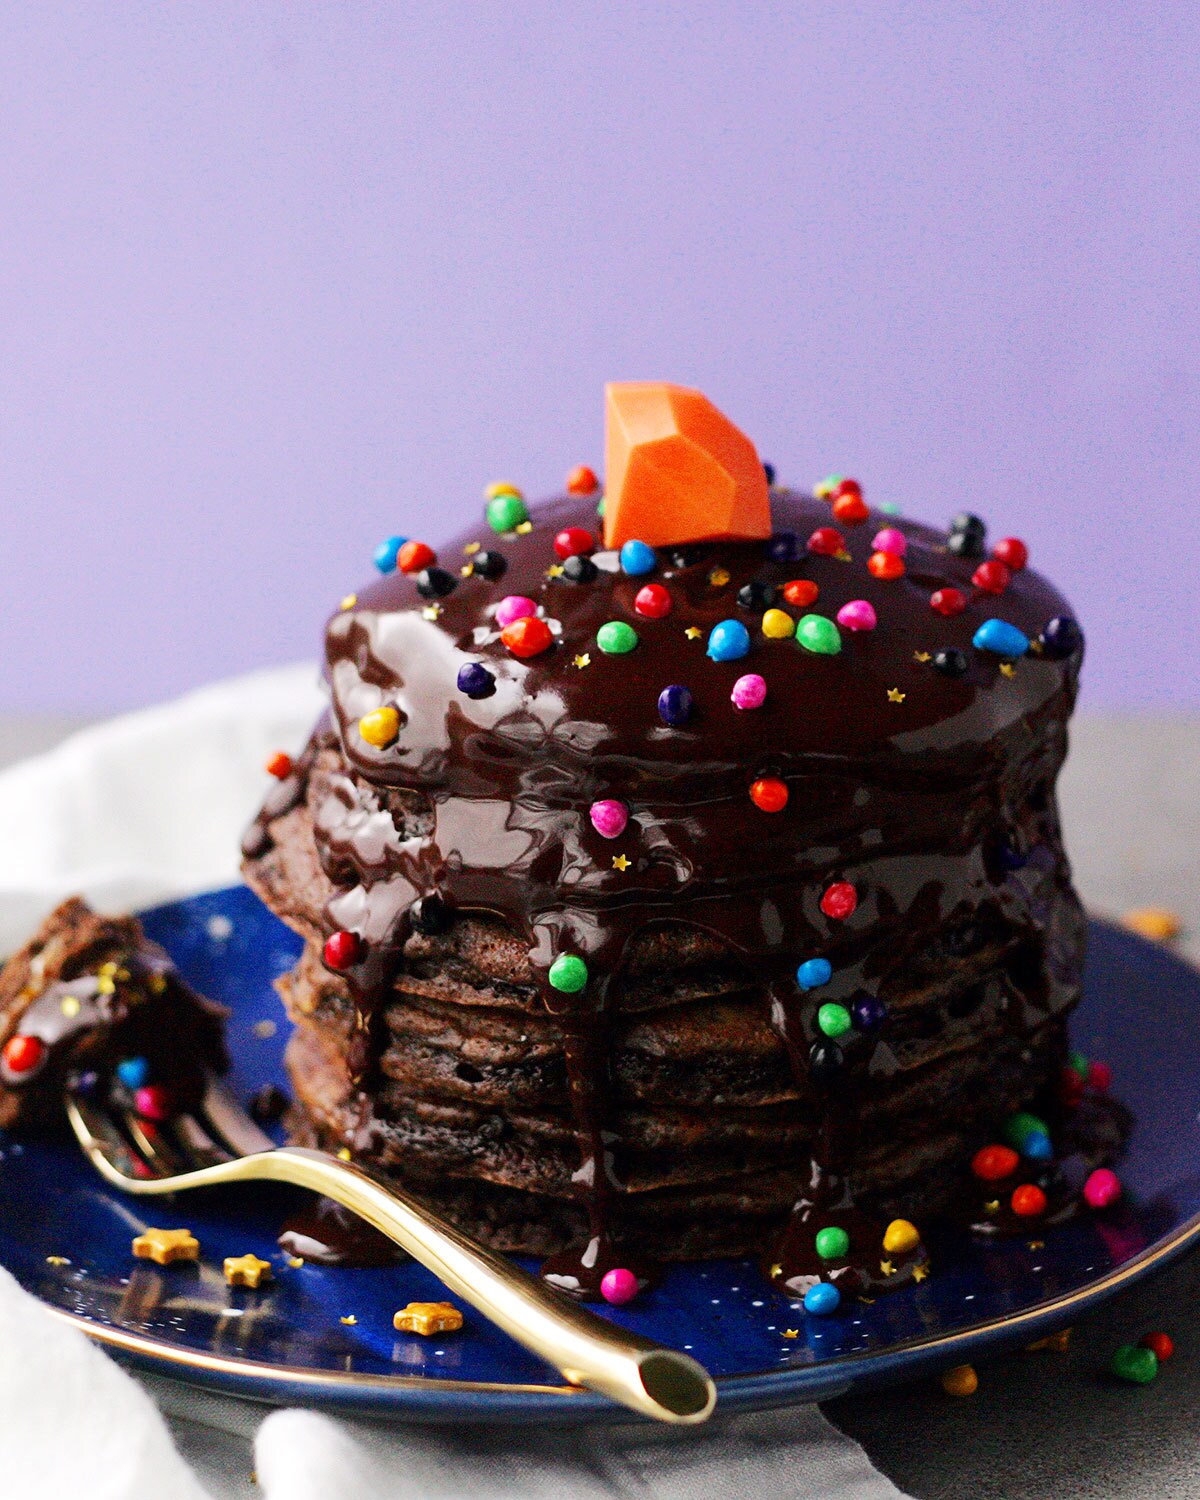 Chocolate pancakes inspired by Onward, topped with sprinkles and a chocolate gem.